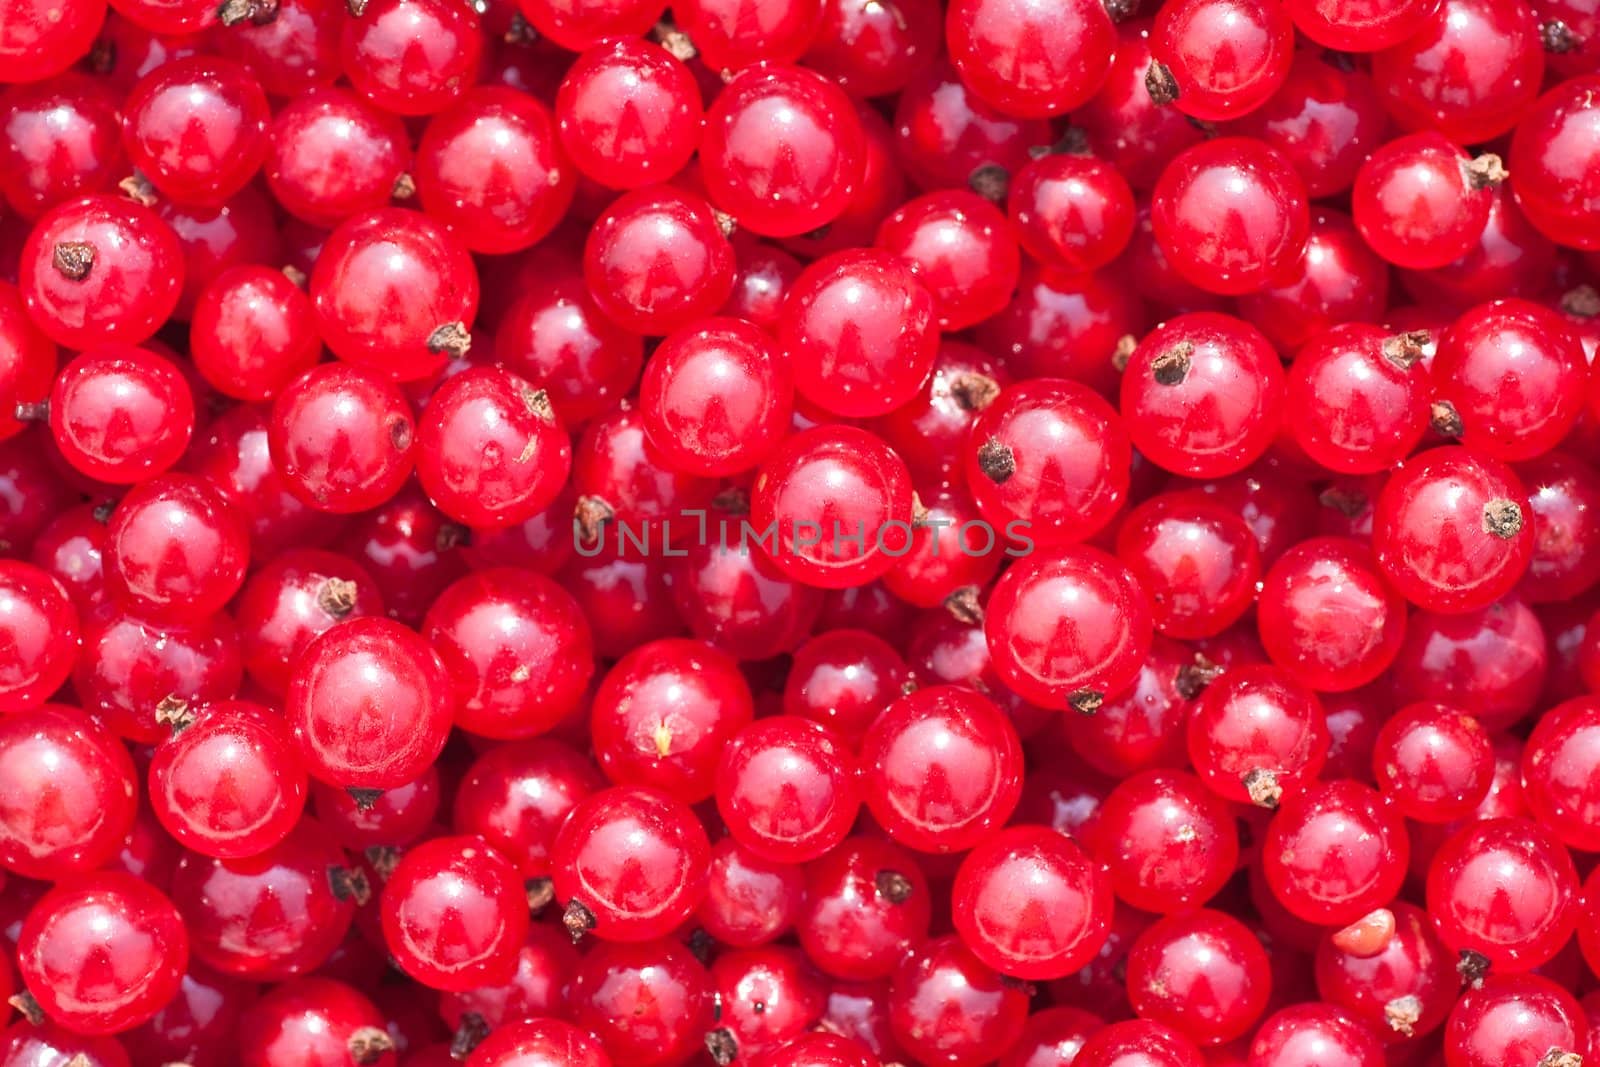 Natural background of berries of a red currant by nikolpetr